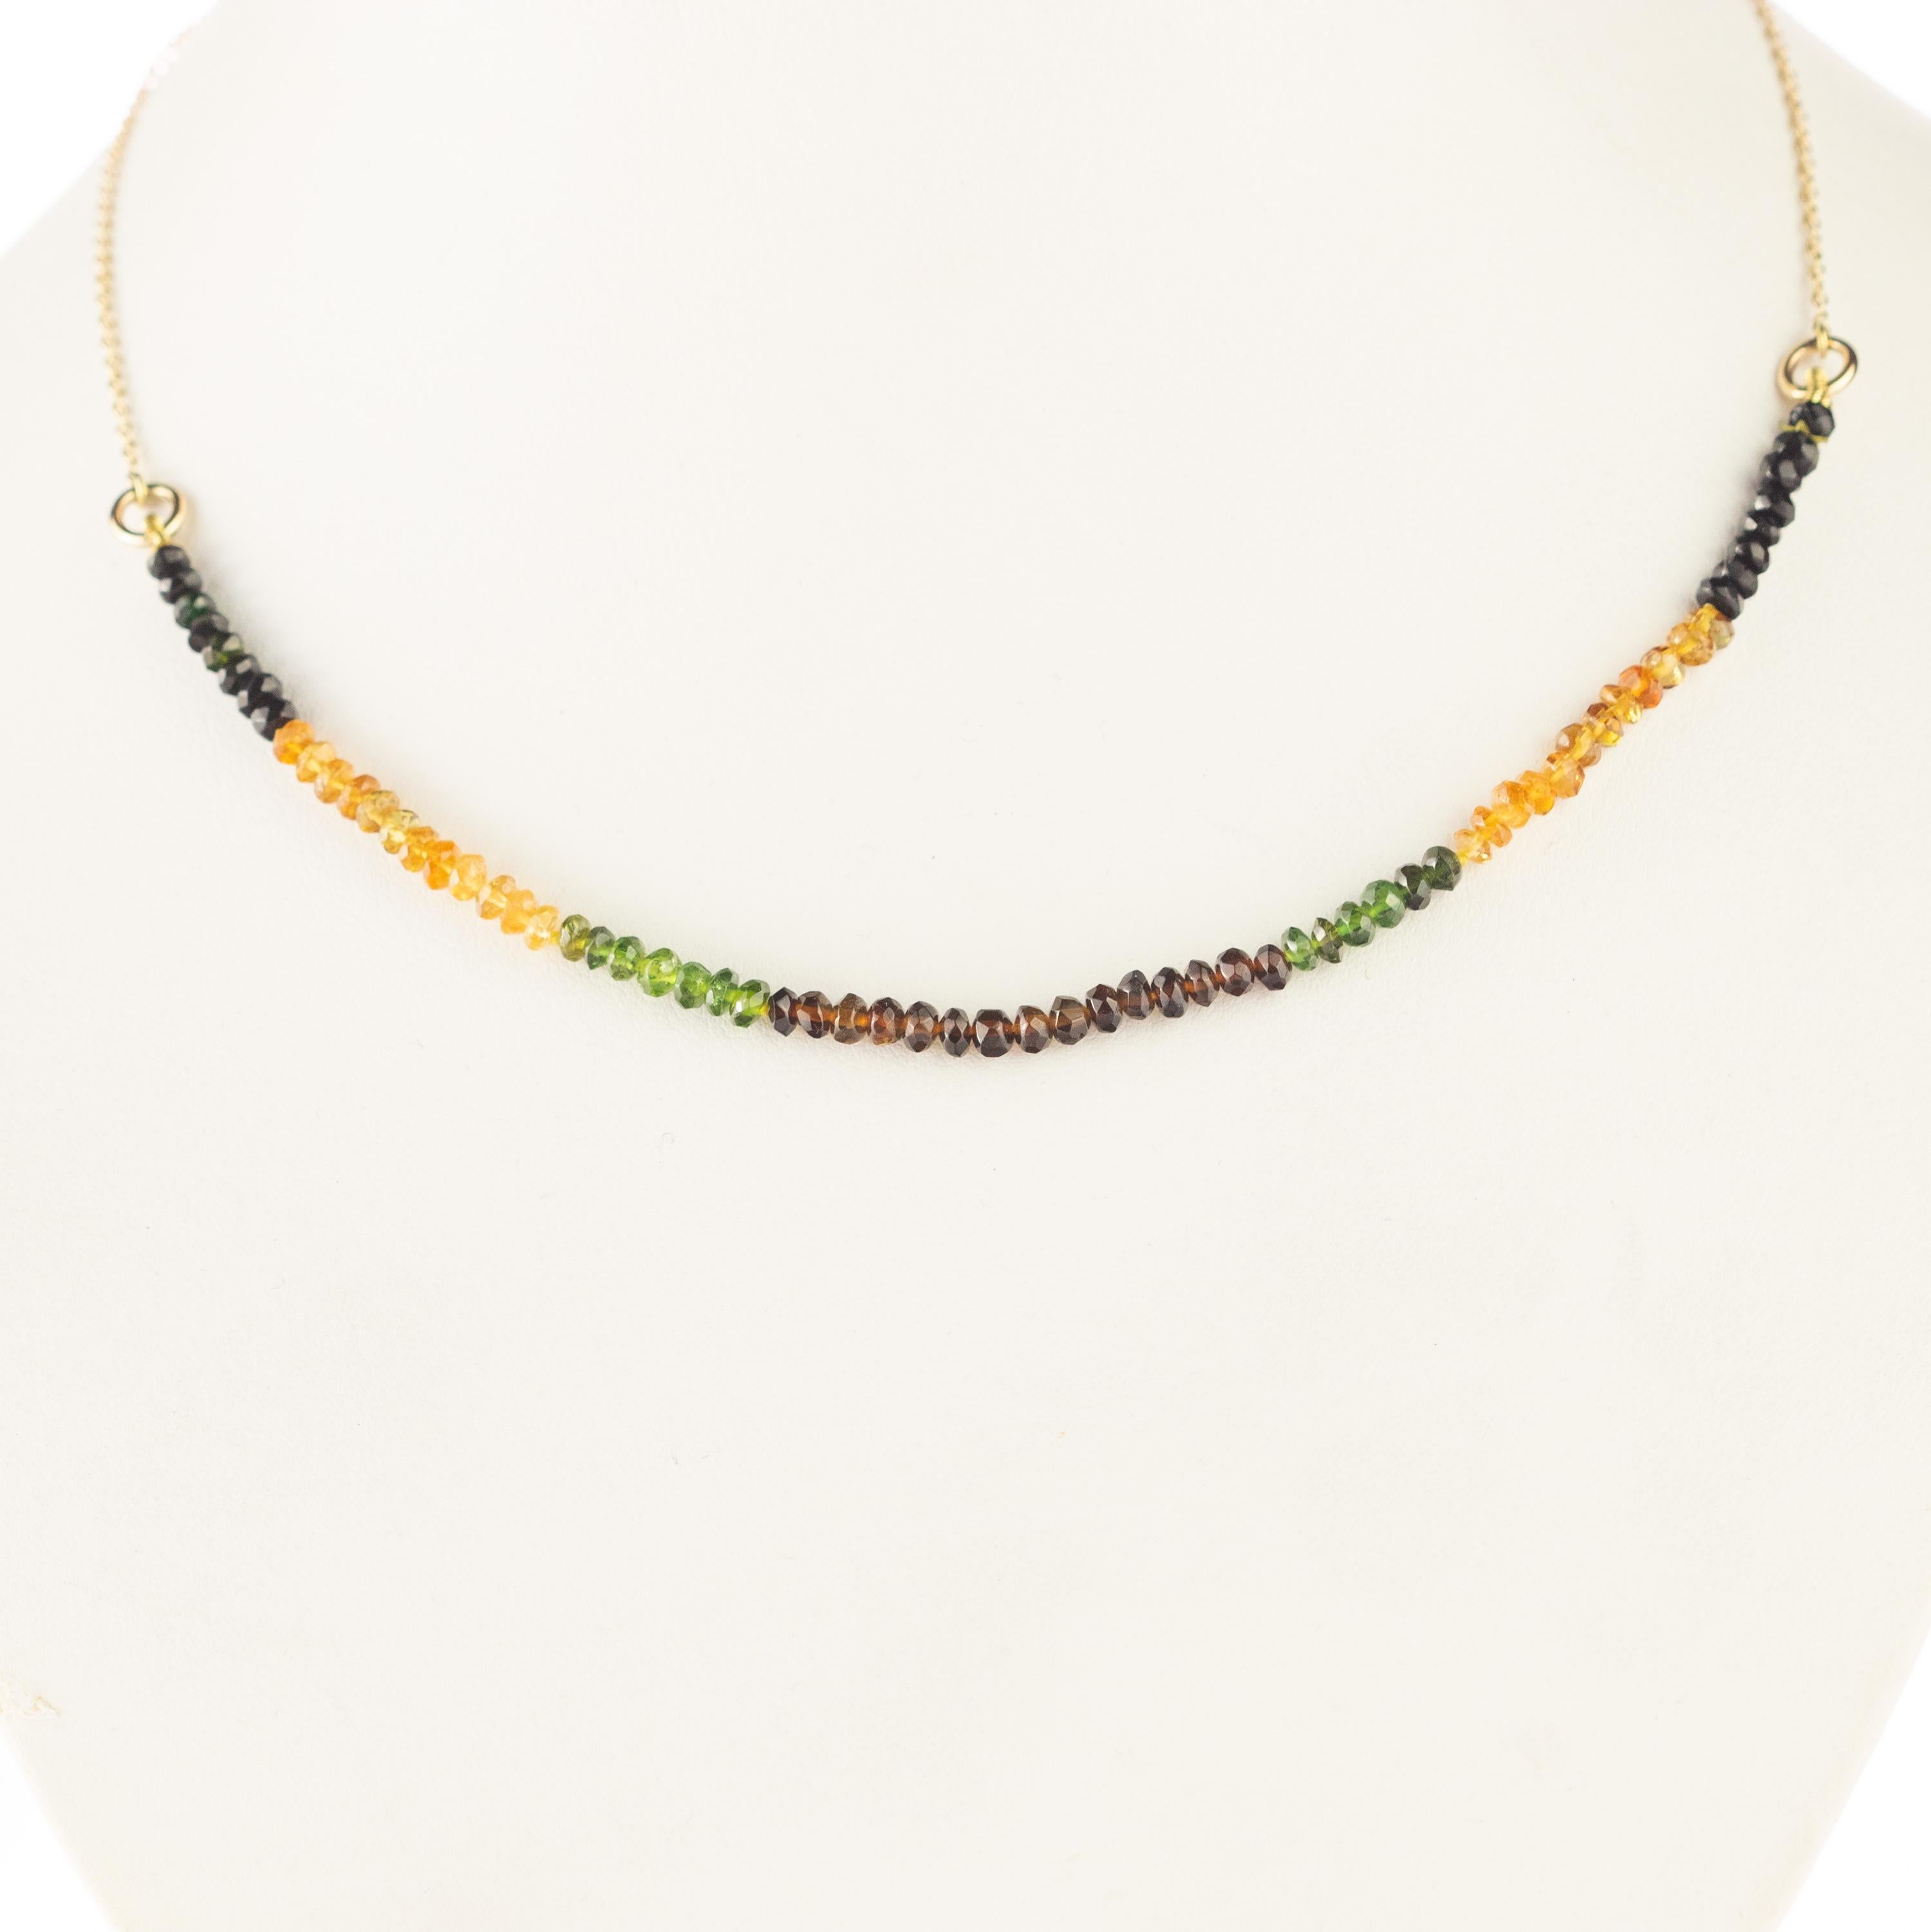 Women's or Men's Intini Jewels 18 Karat Gold Chain Tourmaline Rondelles Cocktail Beaded Necklace For Sale